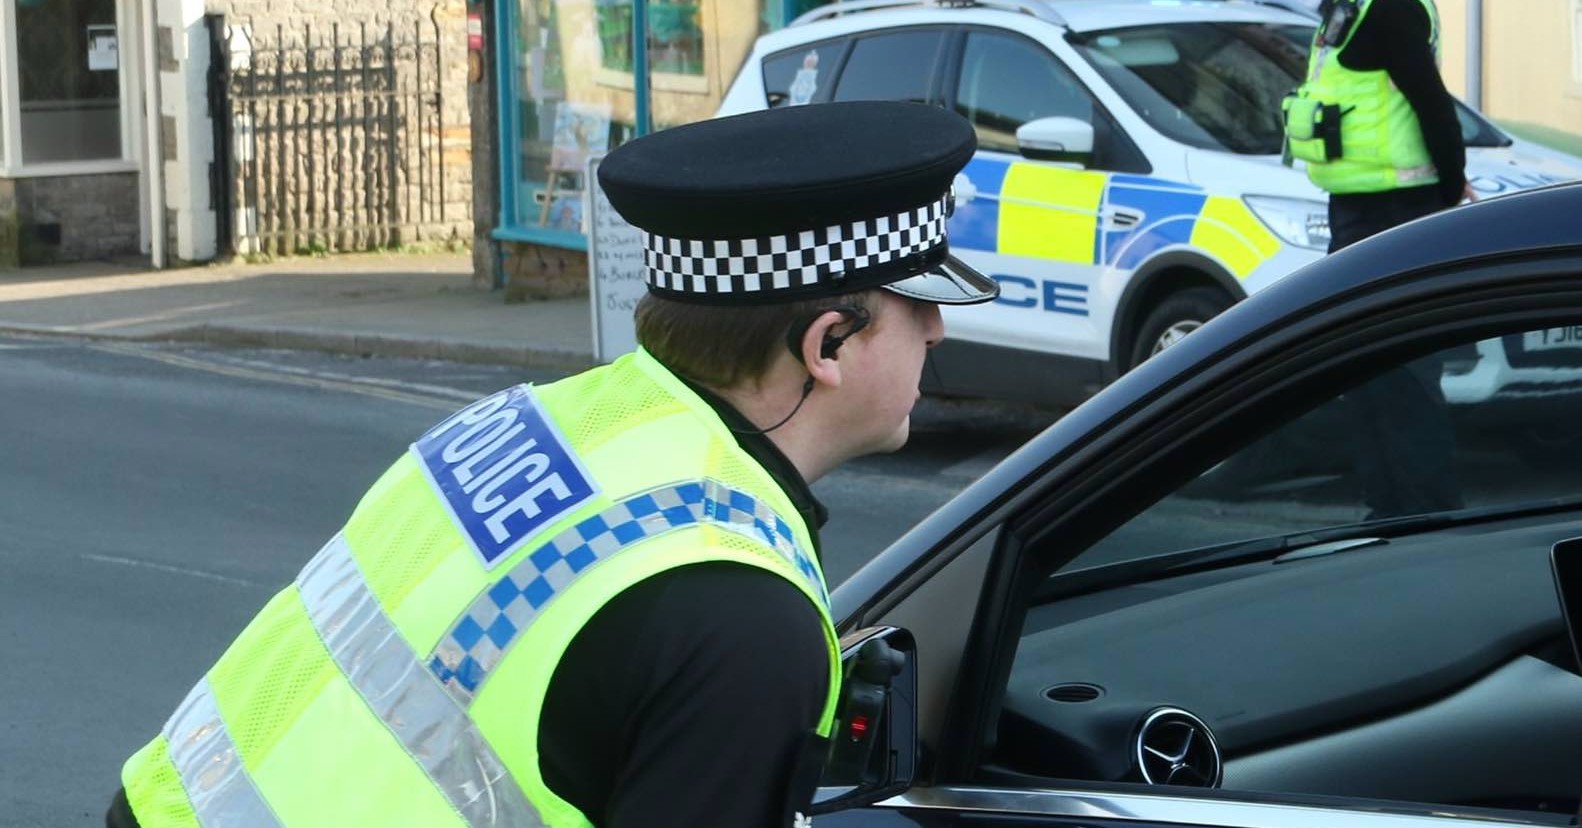 North Yorkshire Police speak to a driver.